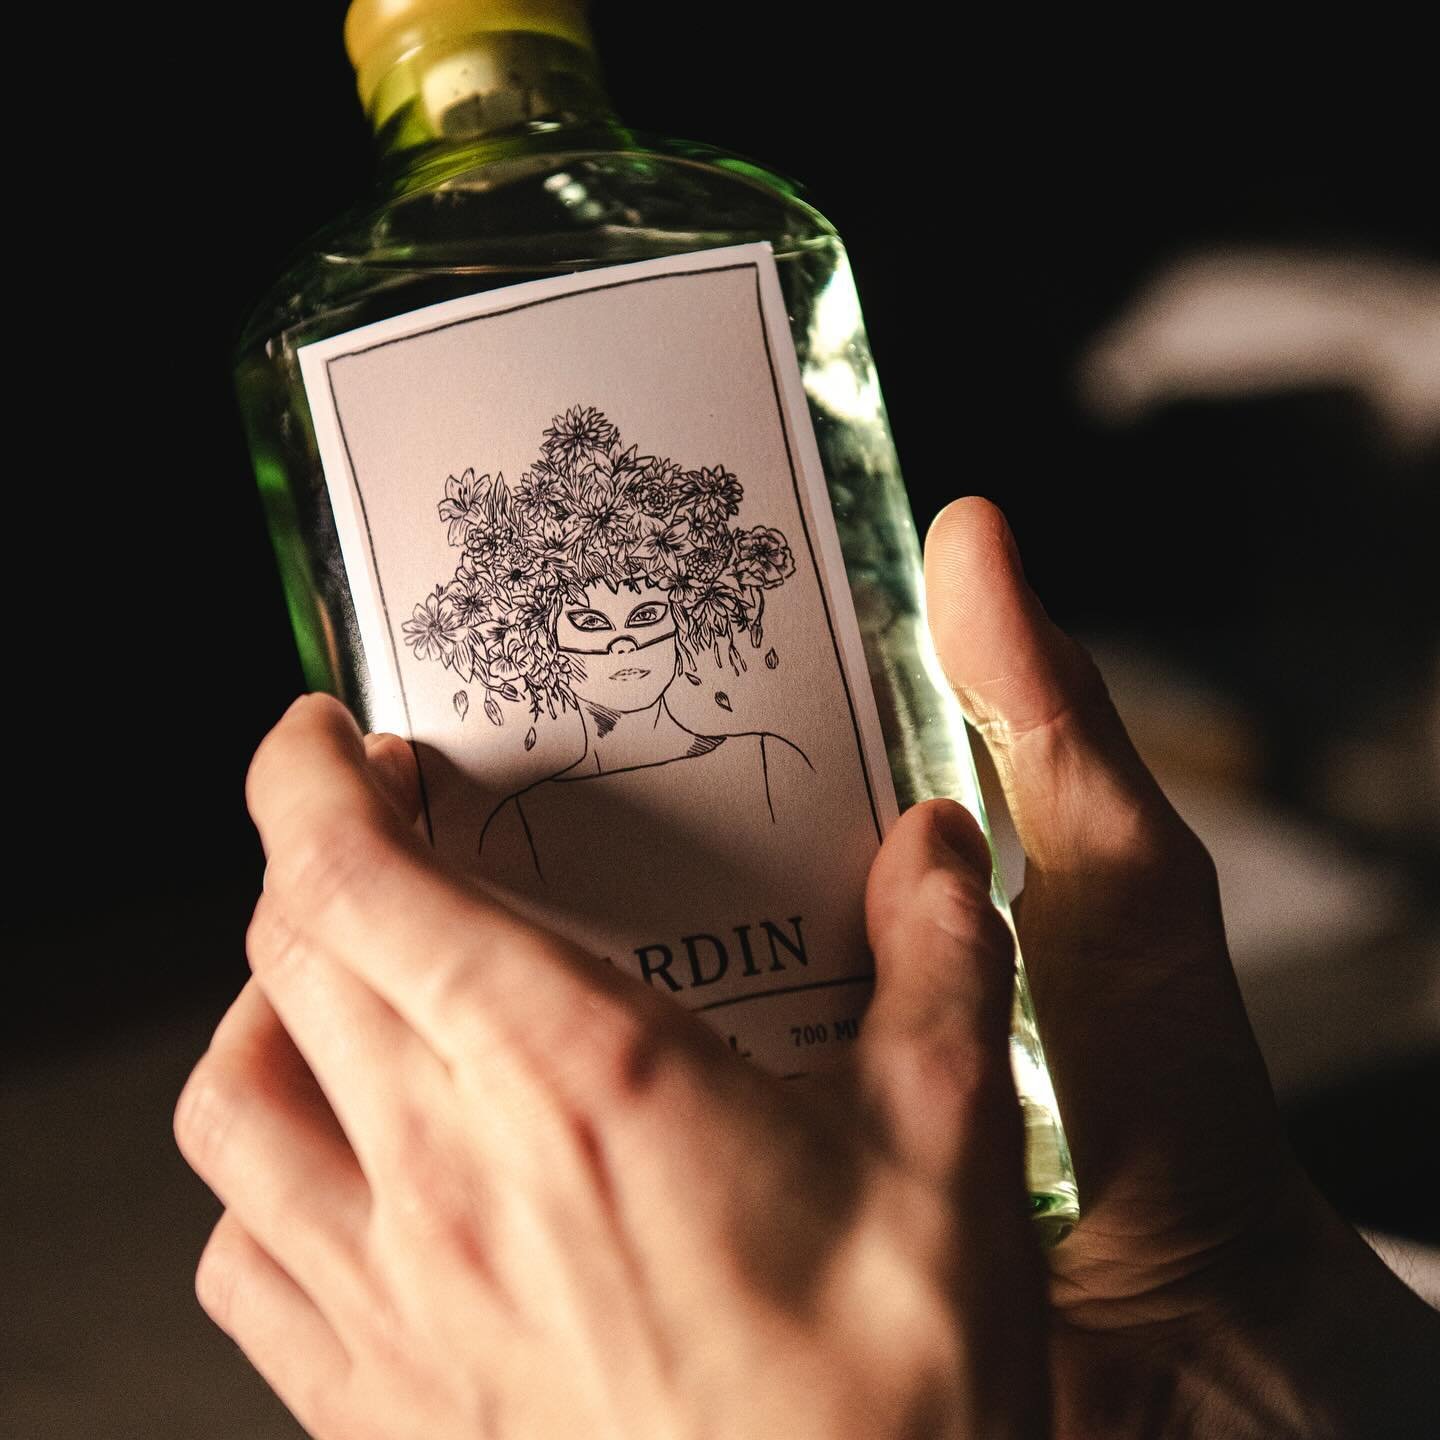 Last week,@kol.mezcaleria have launched their own line of house mezcals and agave spirits. 

Championing small-scale producers in collaboration with @sin_gusano , the new line showcases the variety of agave flavours and distillation methods used thro